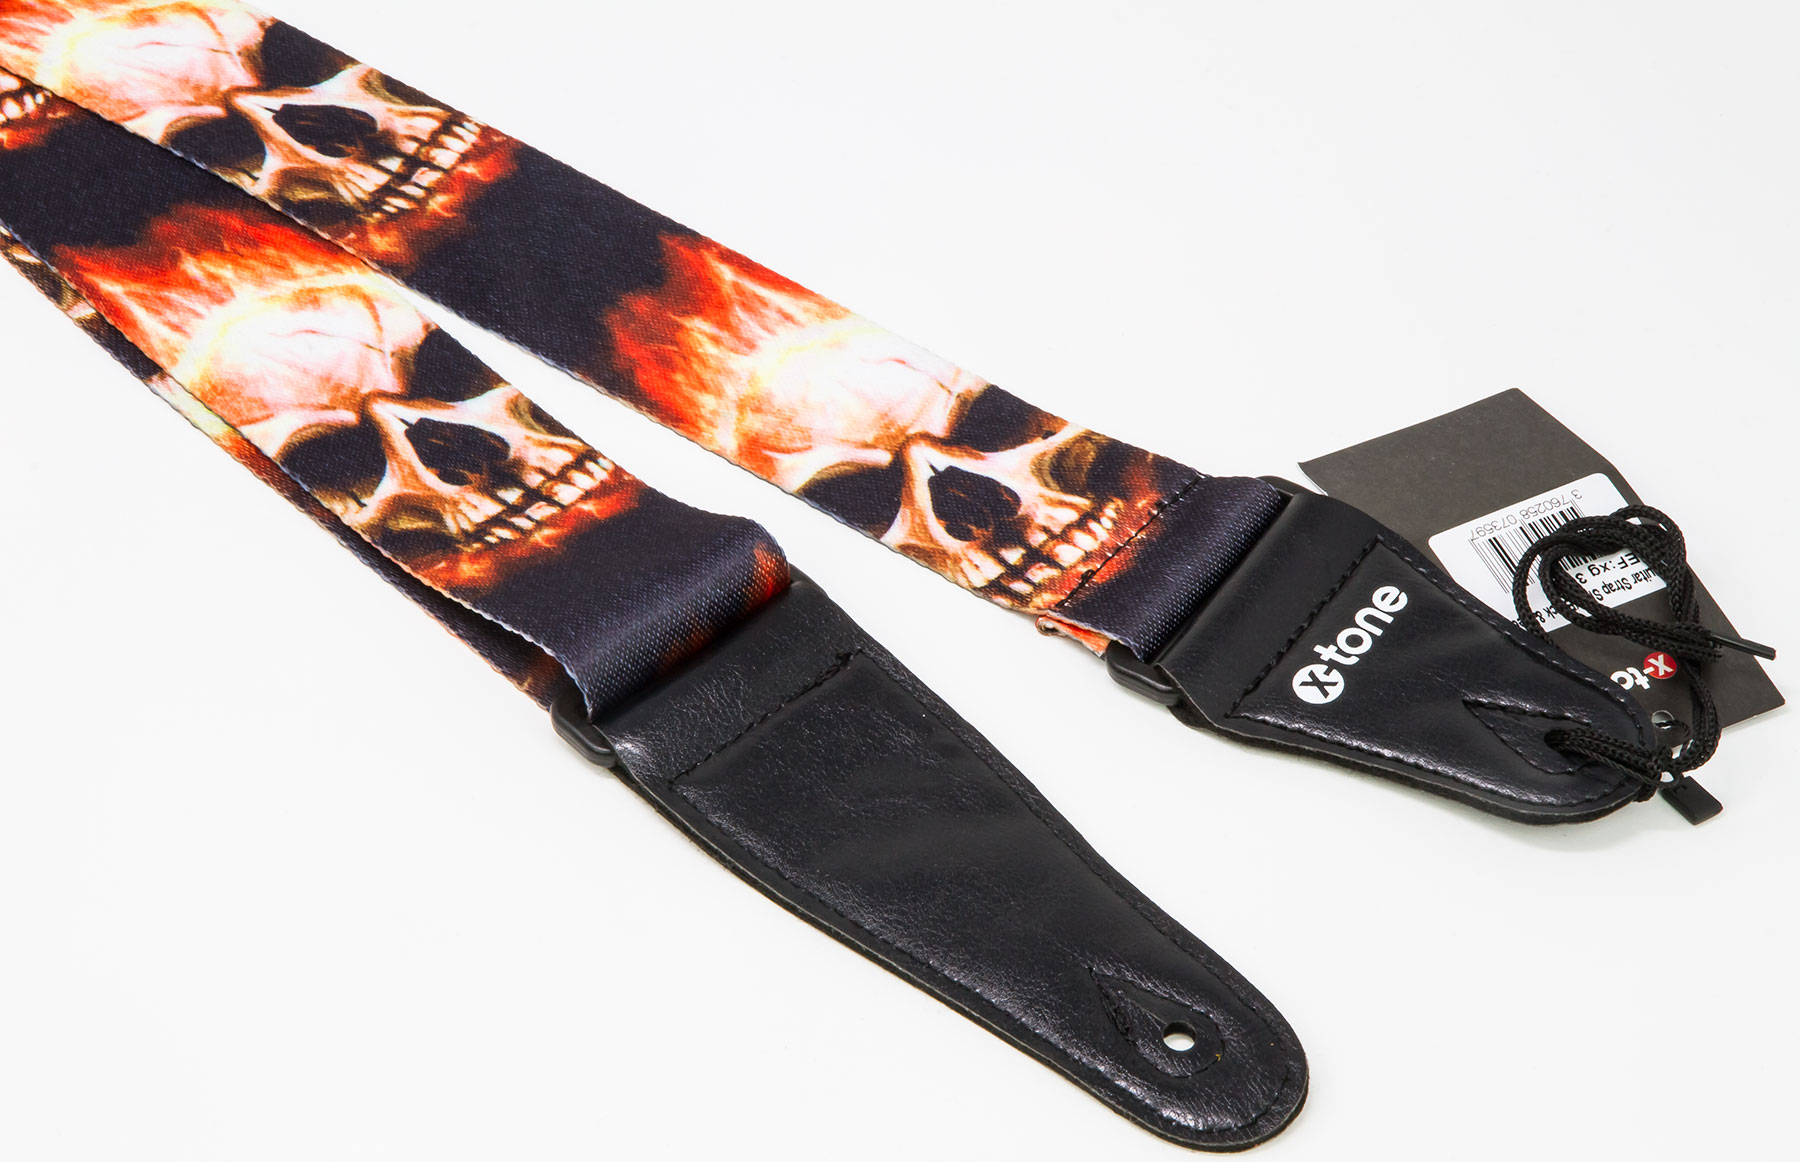 X-tone Xg 3101 Nylon Guitar Strap Skull With Flame Black & Red - Sangle Courroie - Variation 1